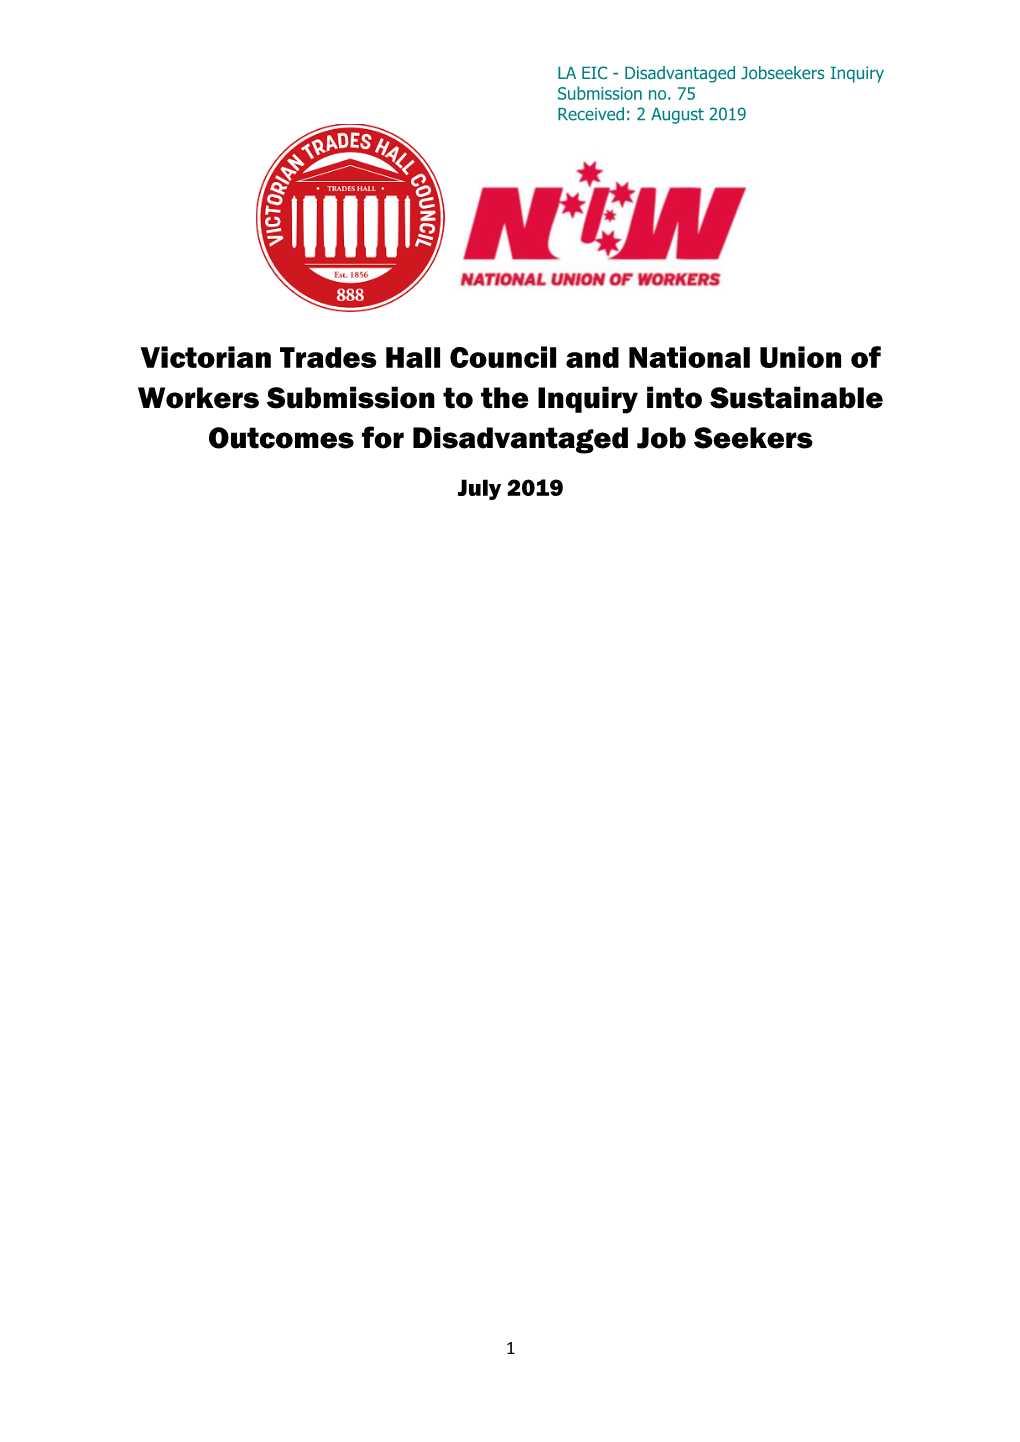 Victorian Trades Hall Council and National Union of Workers Submission to the Inquiry Into Sustainable Outcomes for Disadvantaged Job Seekers July 2019